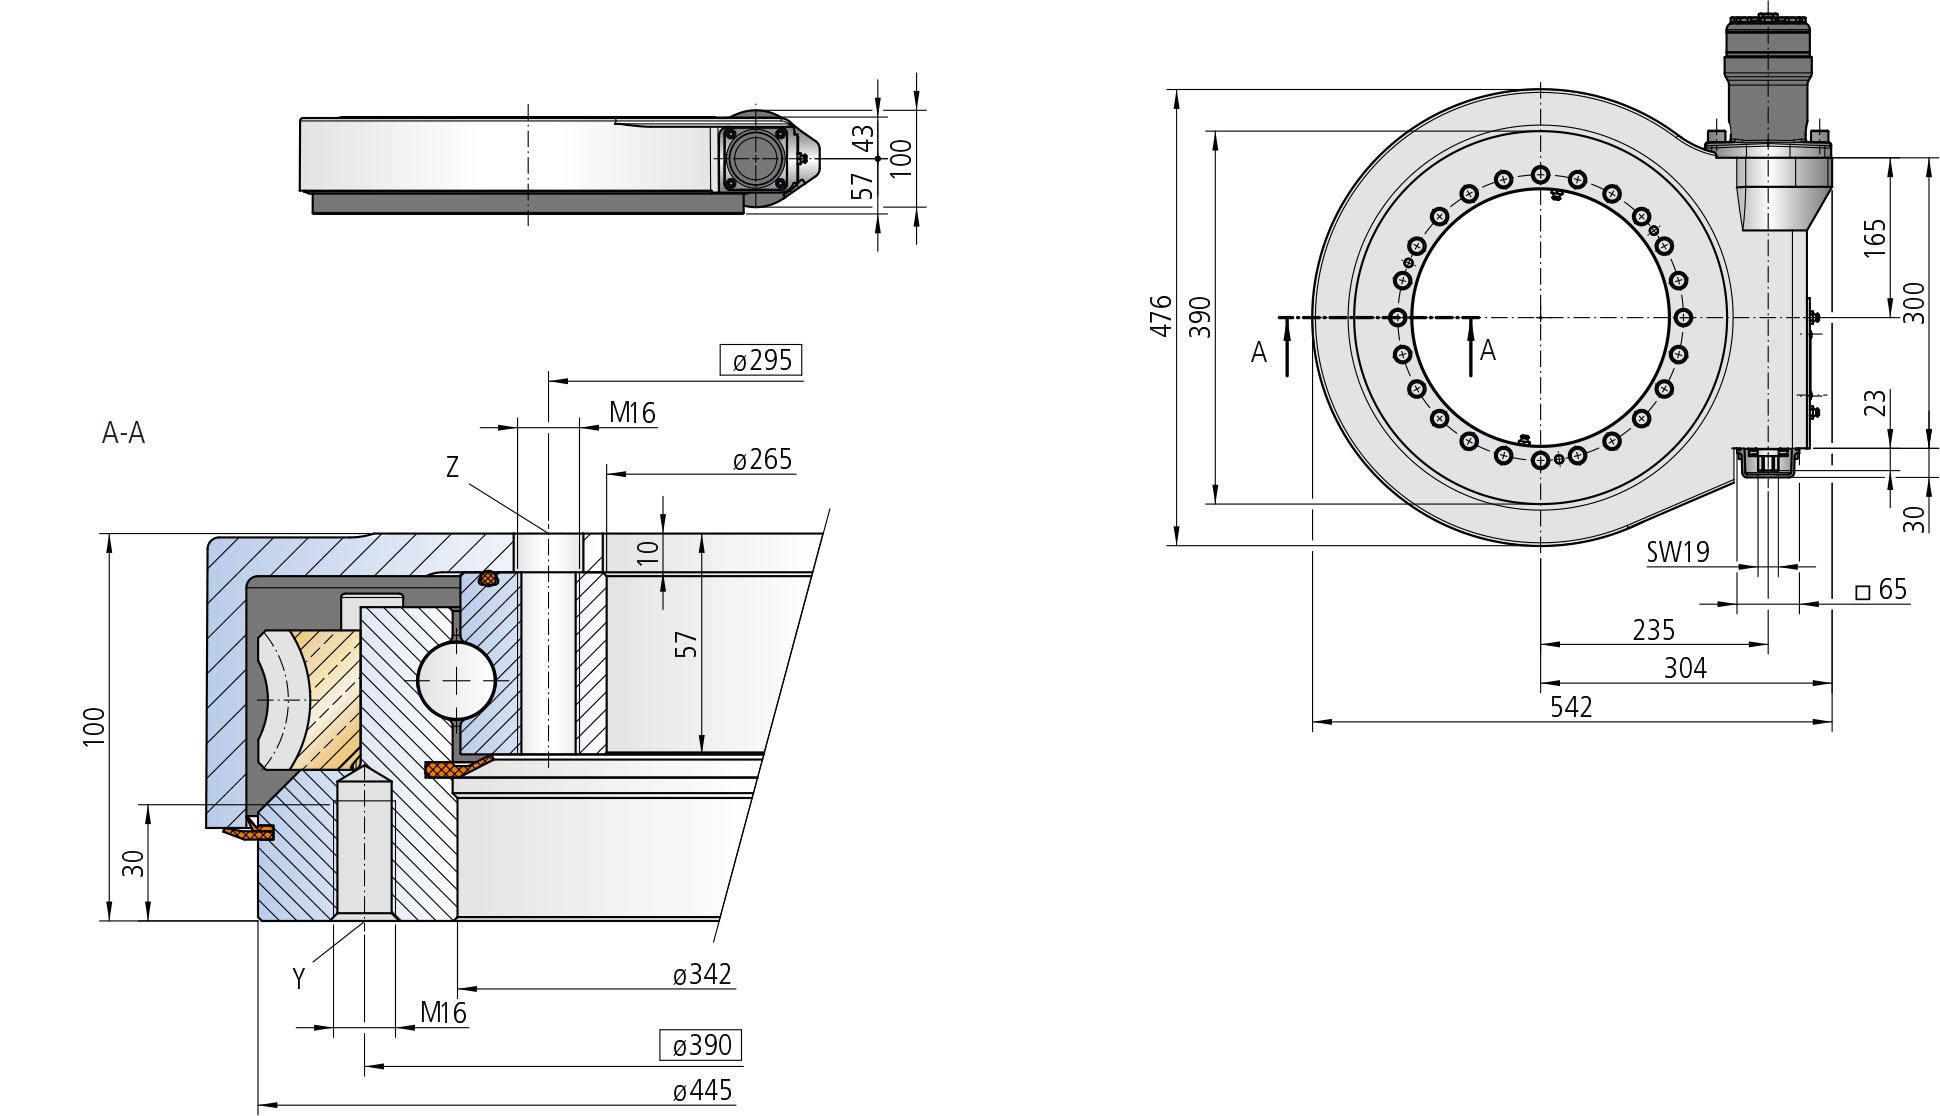 WD-LC 0343 / 1-row / 1 drive WD-L Series cad drawing